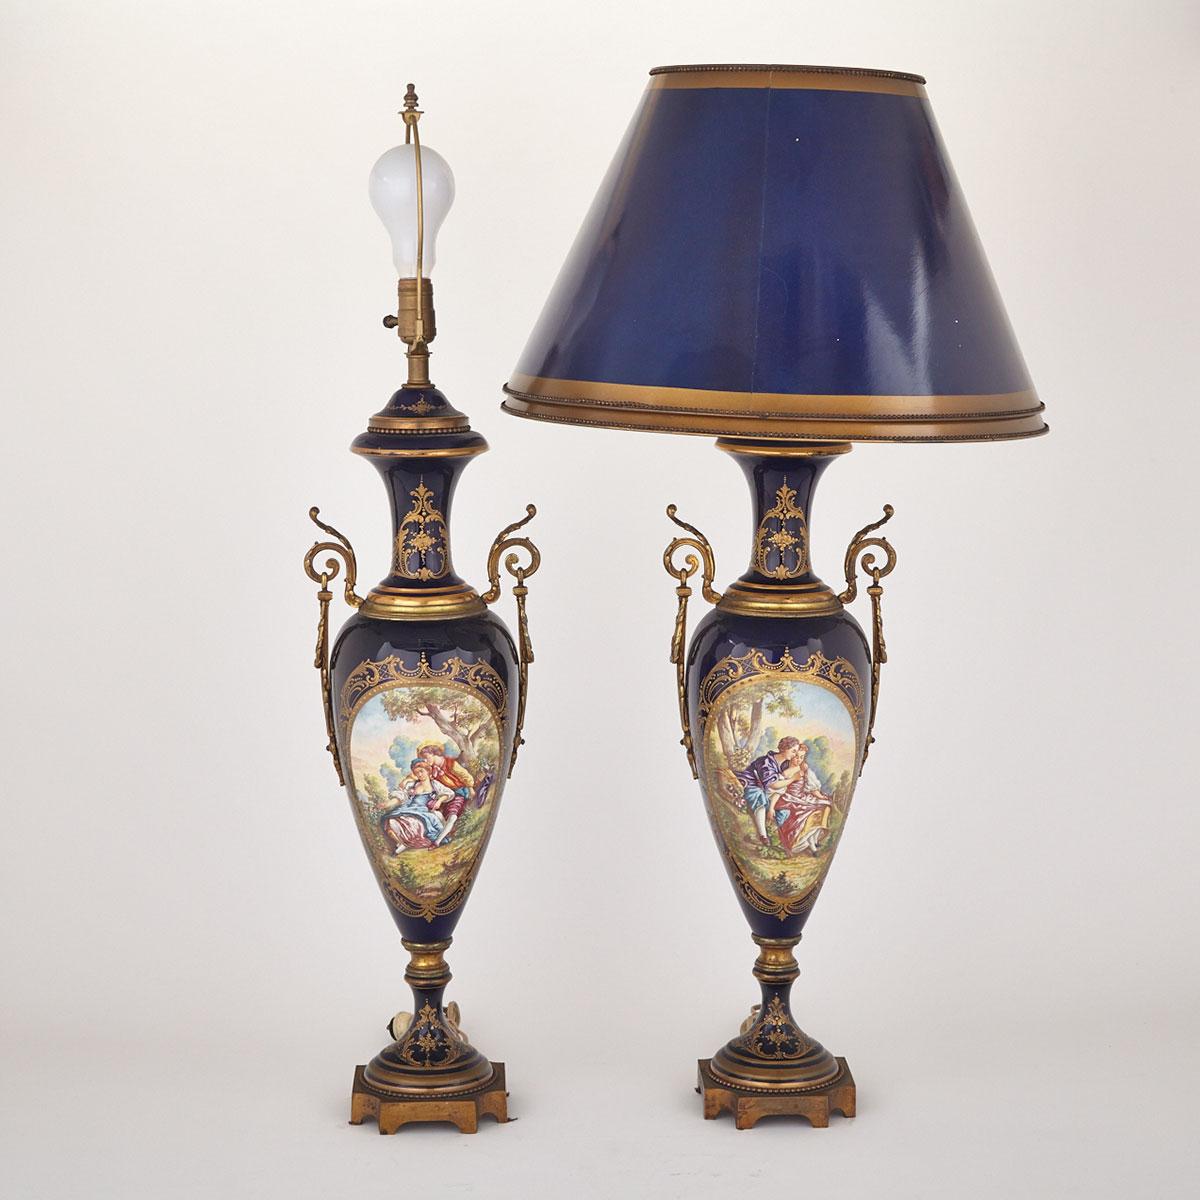 Pair of Gilt Bronze Mounted Blue Ground ‘Sèvres’ Table Lamps, 20th century